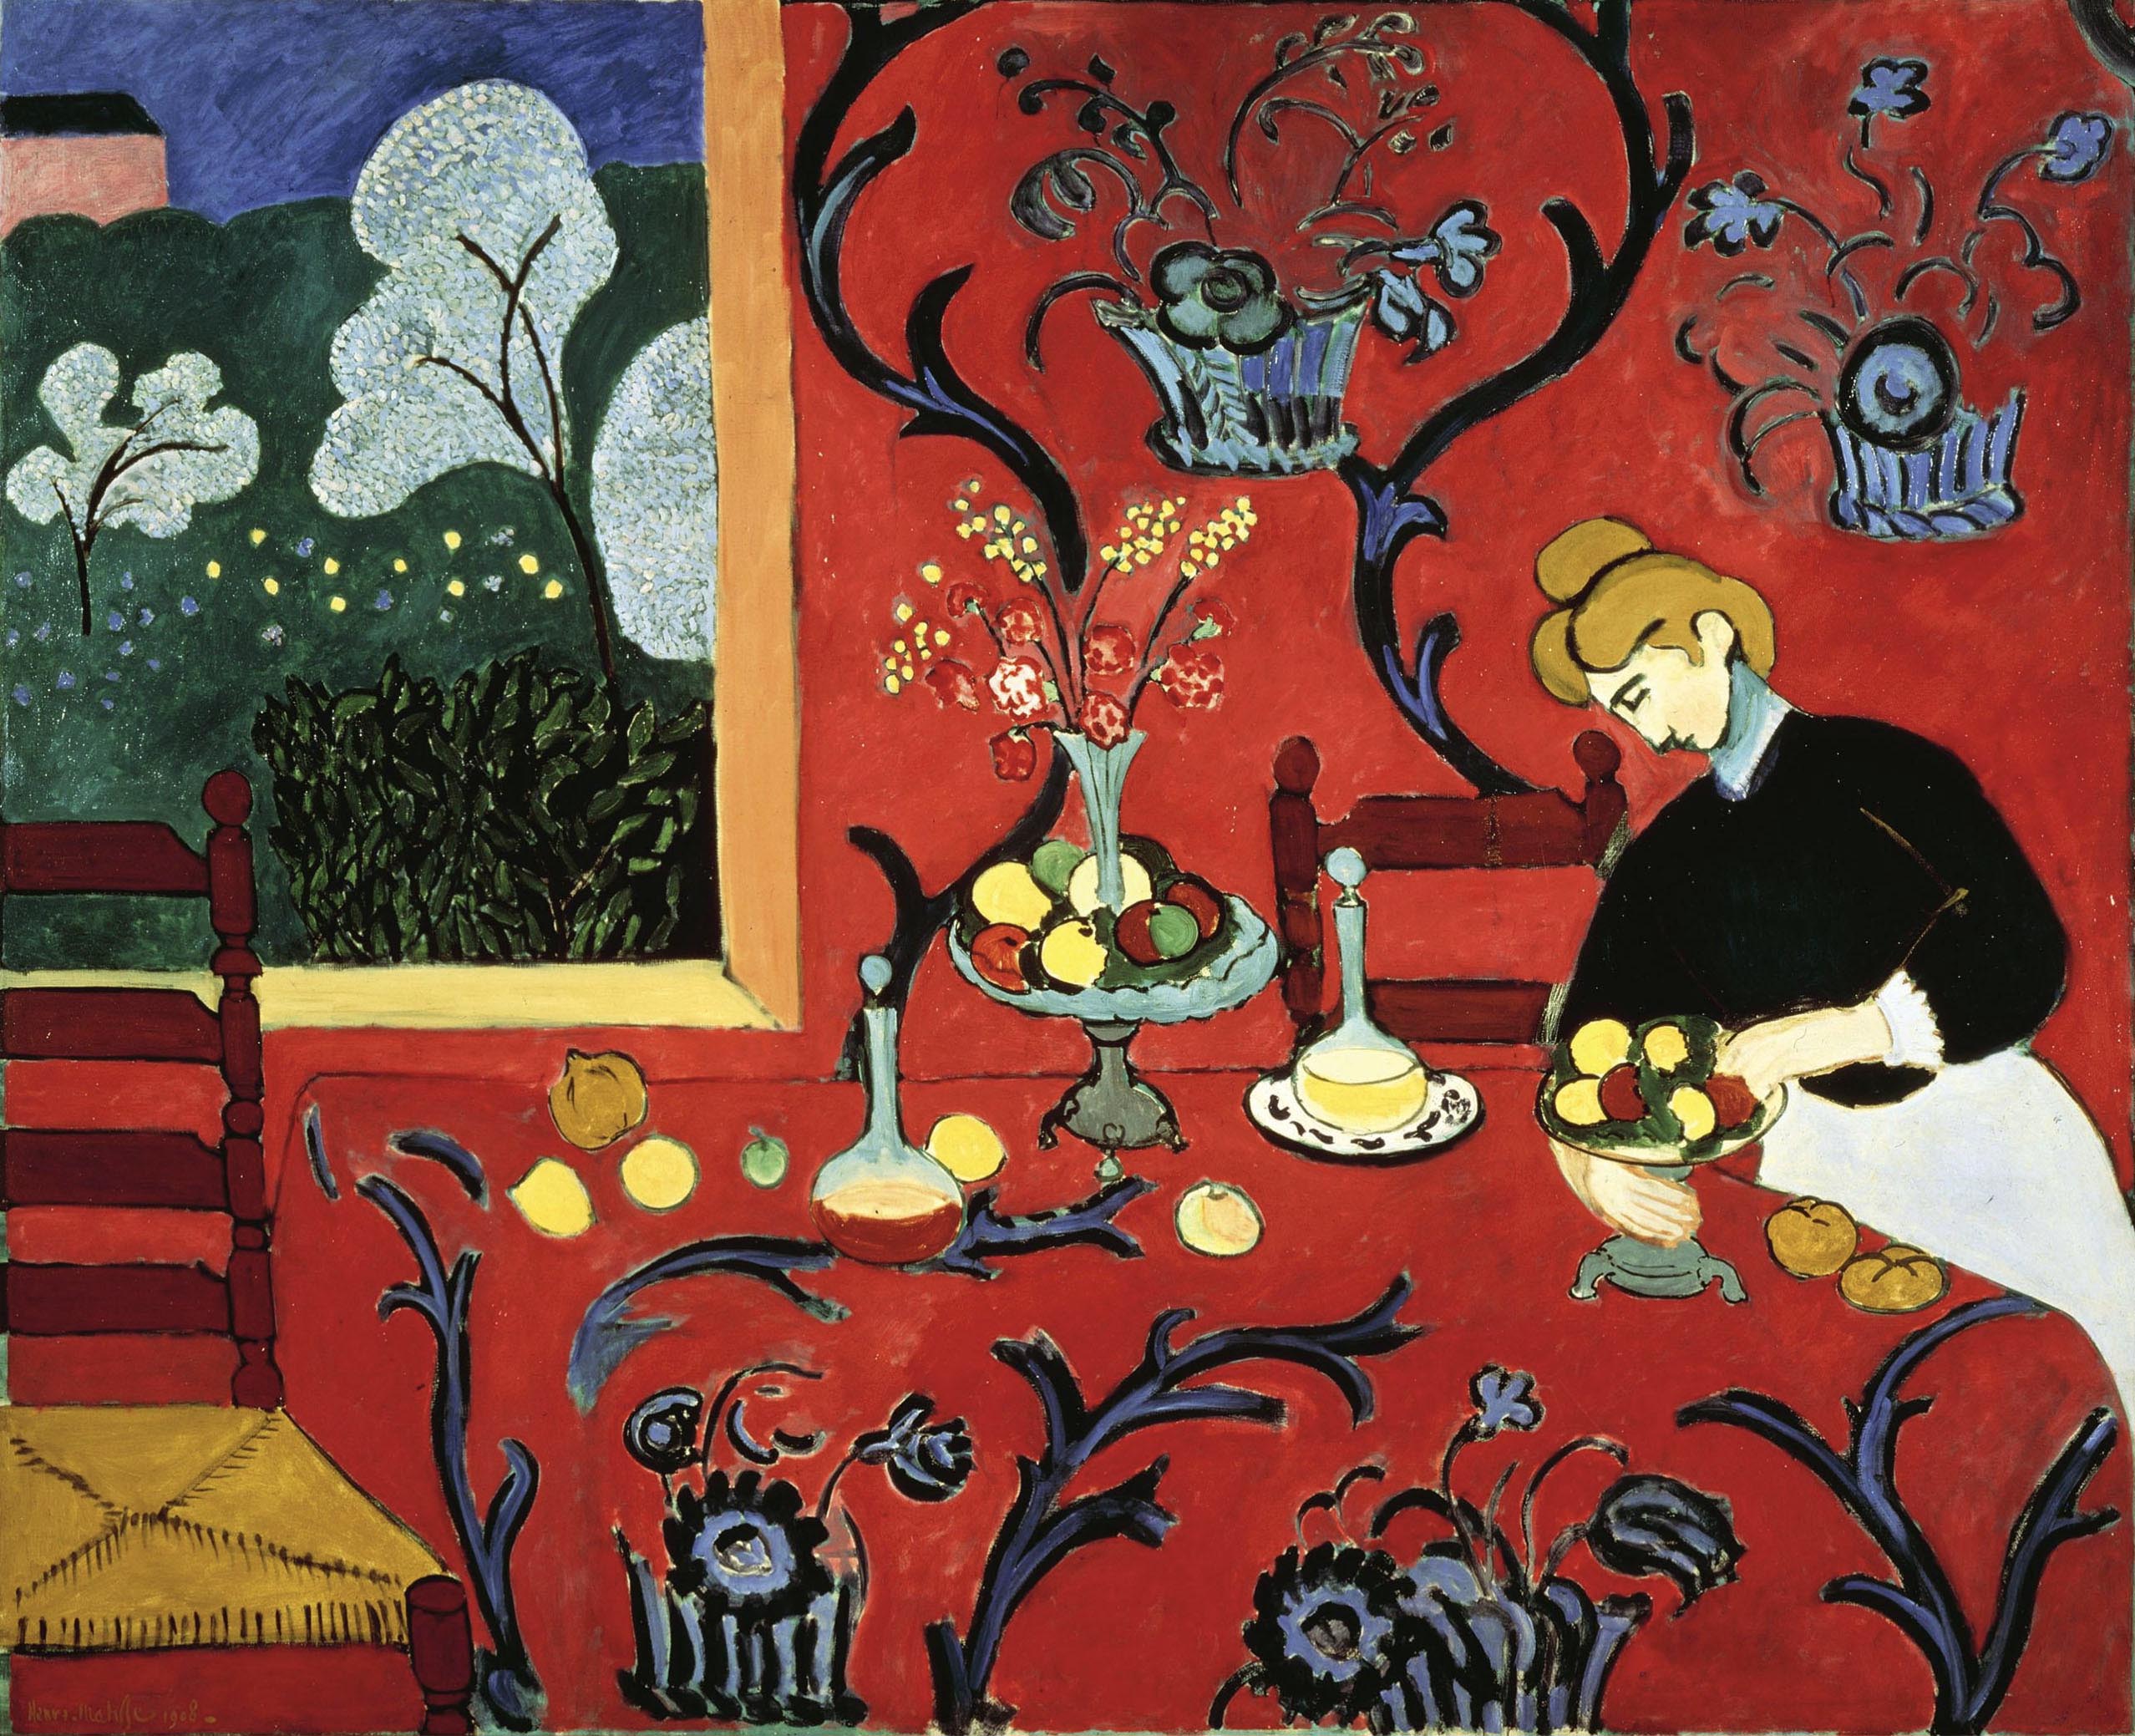 Henri Matisse, The Dessert (Harmony in Red), 1908, oil on canvas, 180.5 x 221 cm (The State Hermitage Museum)